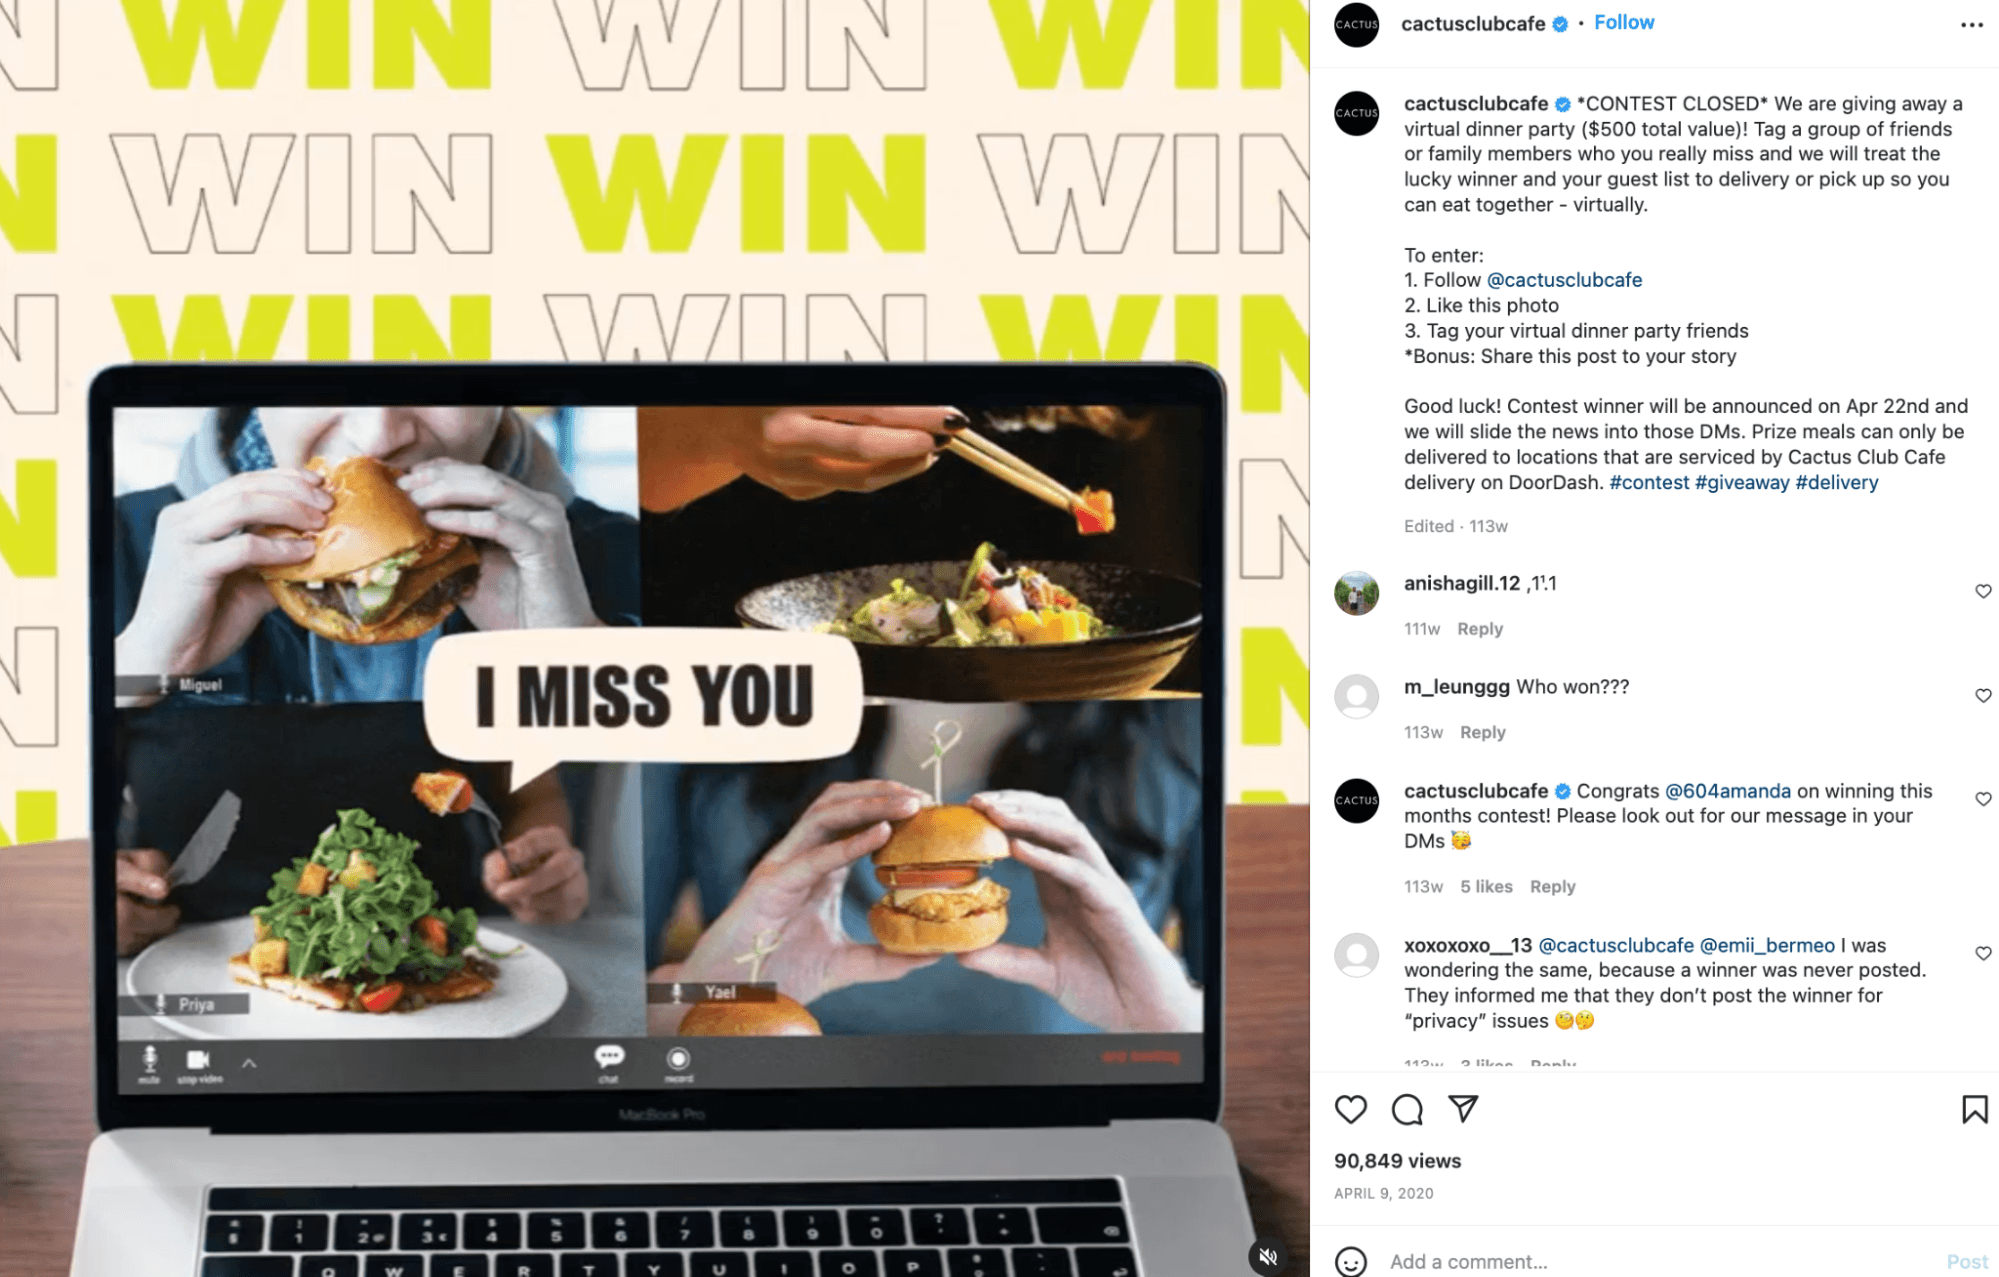 Example of a social media contest being hosted by Cactus Club Cafe on Instagram